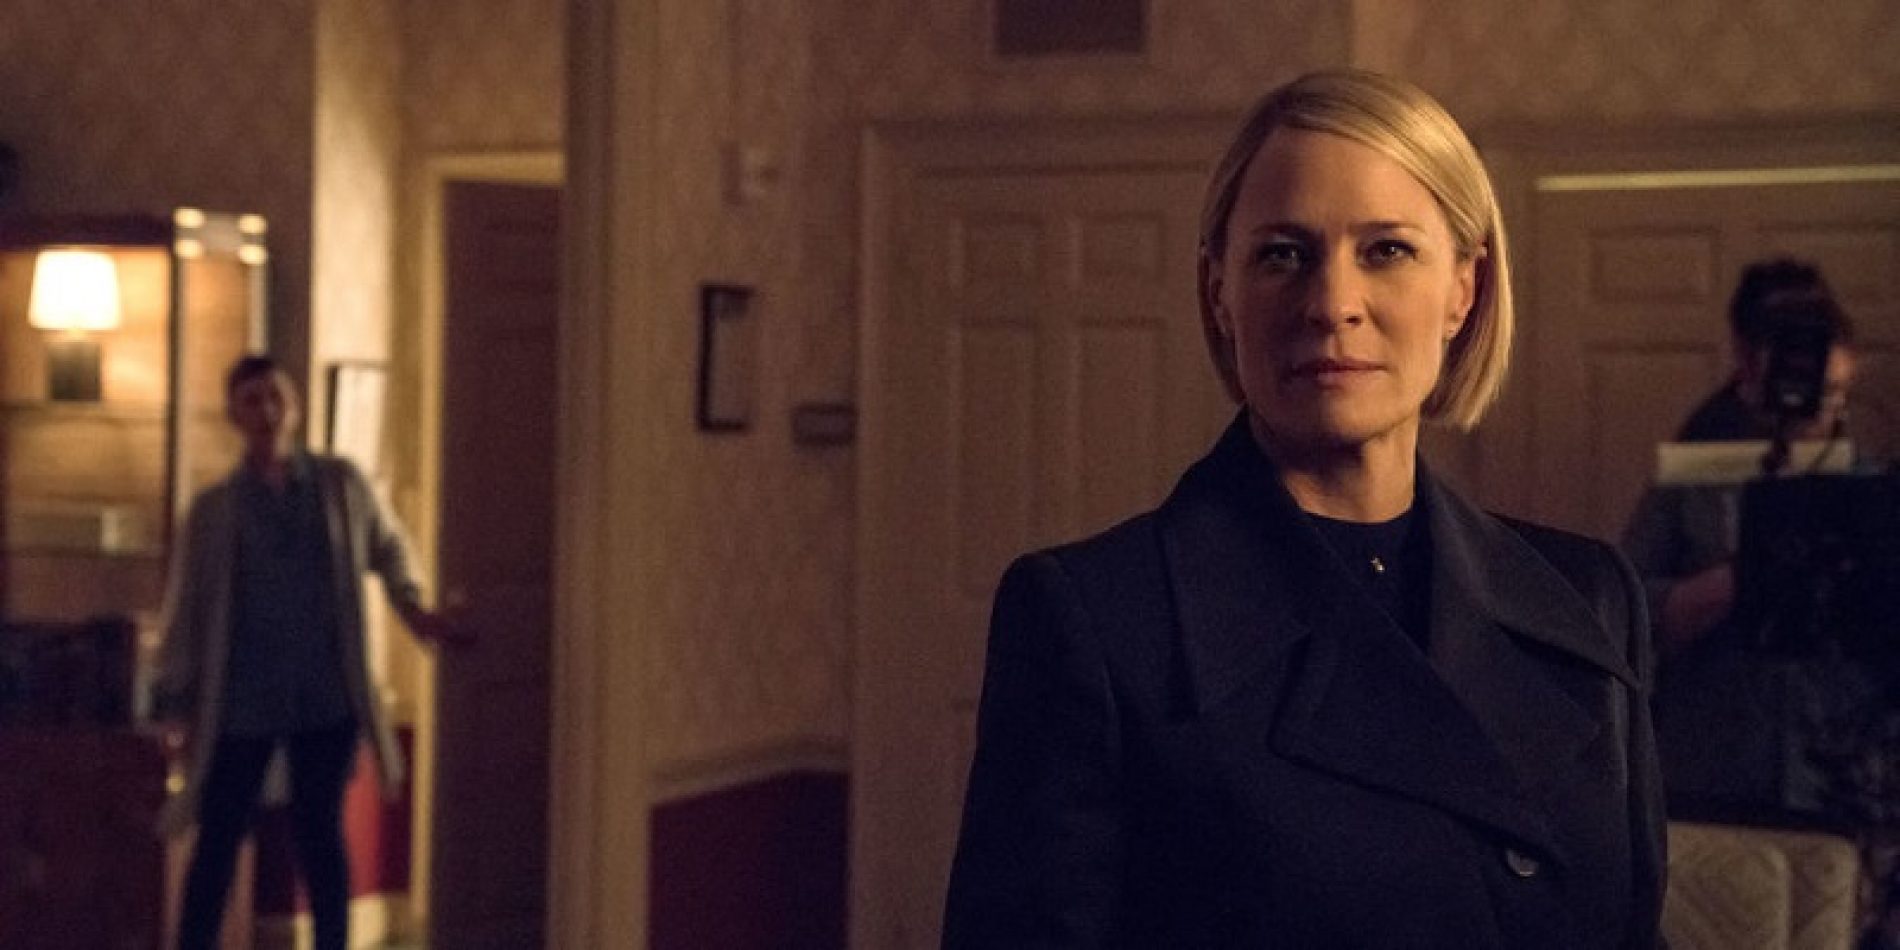 “I Didn’t Know The Man.” Robin Wright Breaks Silence On ‘House of Cards’ Costar Kevin Spacey